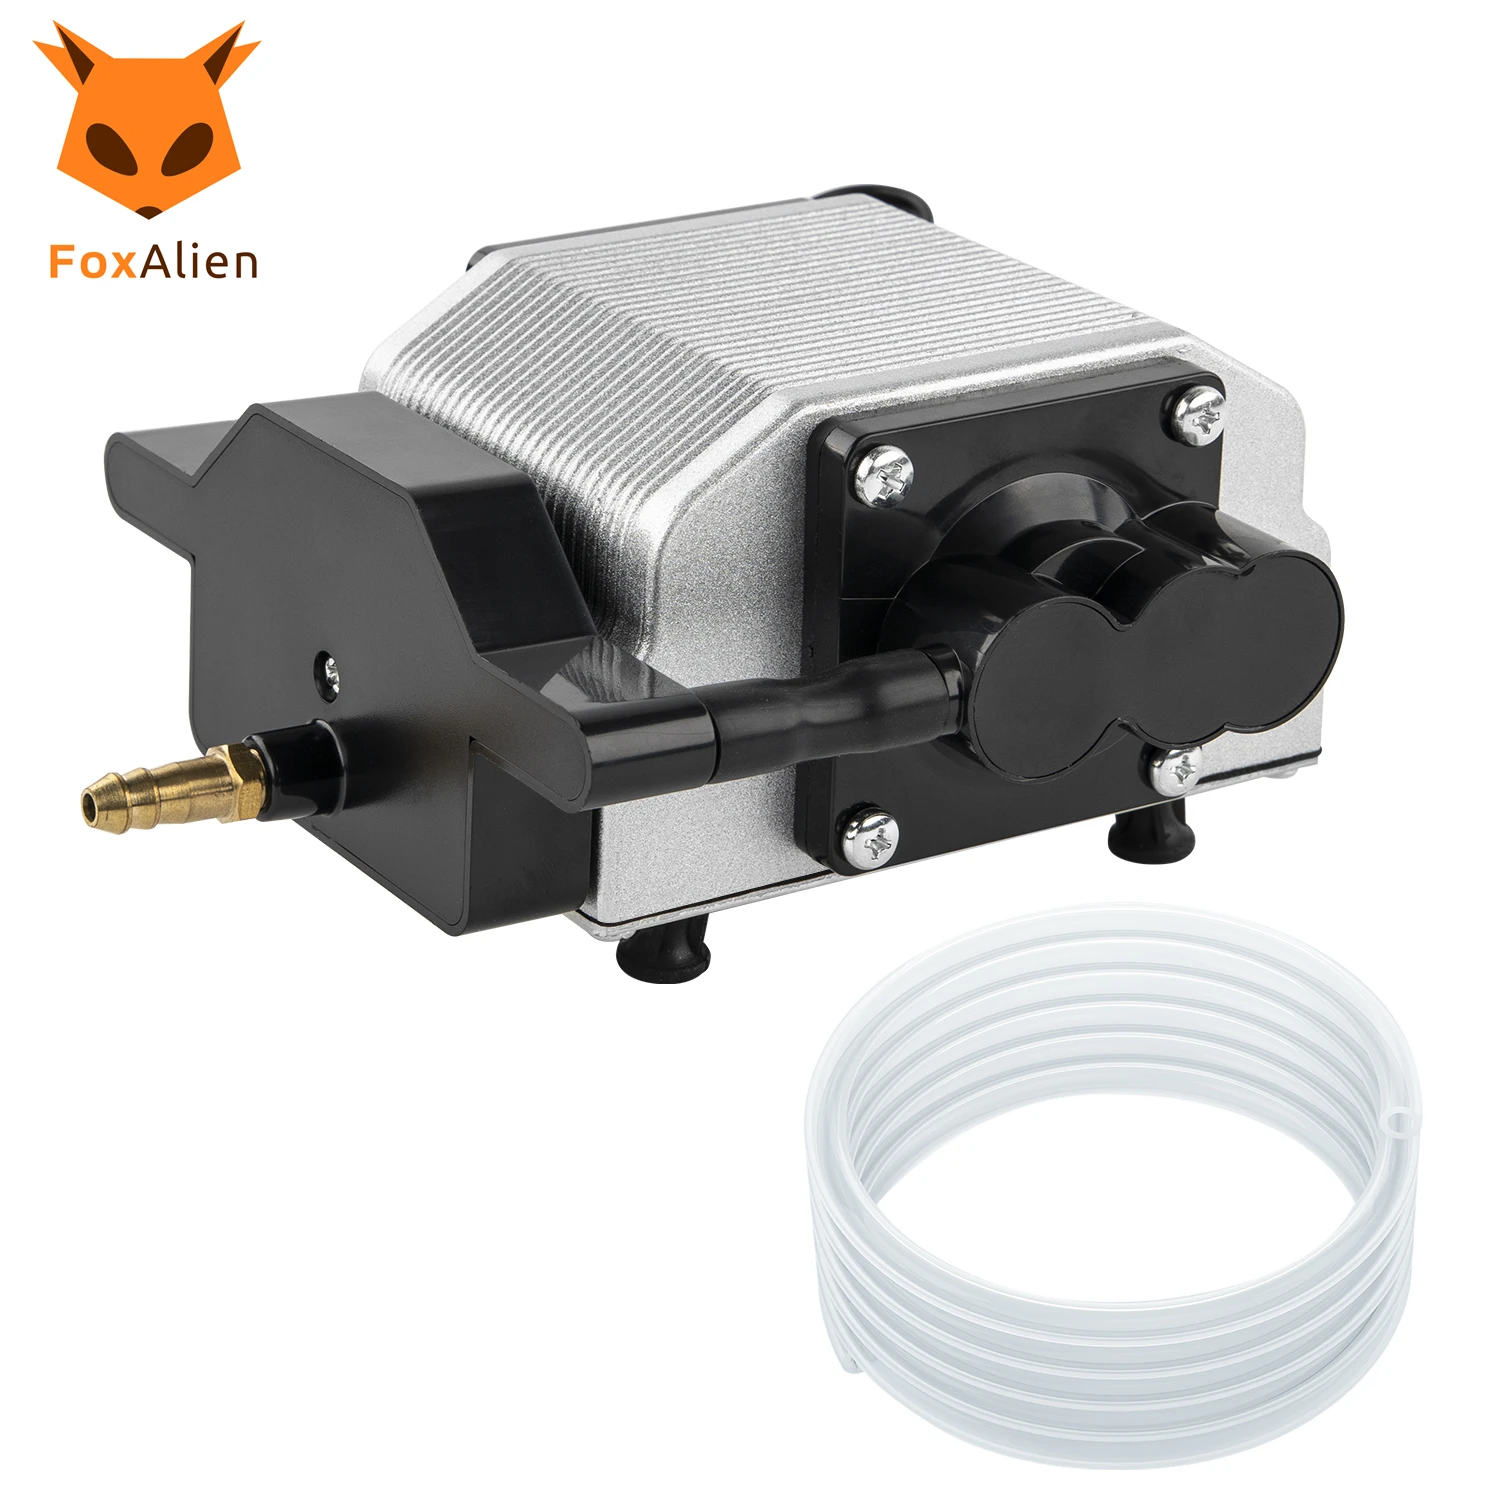 FoxAlien 30L/Min Air Assist Pump for Laser Cutter, Portable CNC Machine Kit for All laser Engraving Adjustable Speed Low Noise